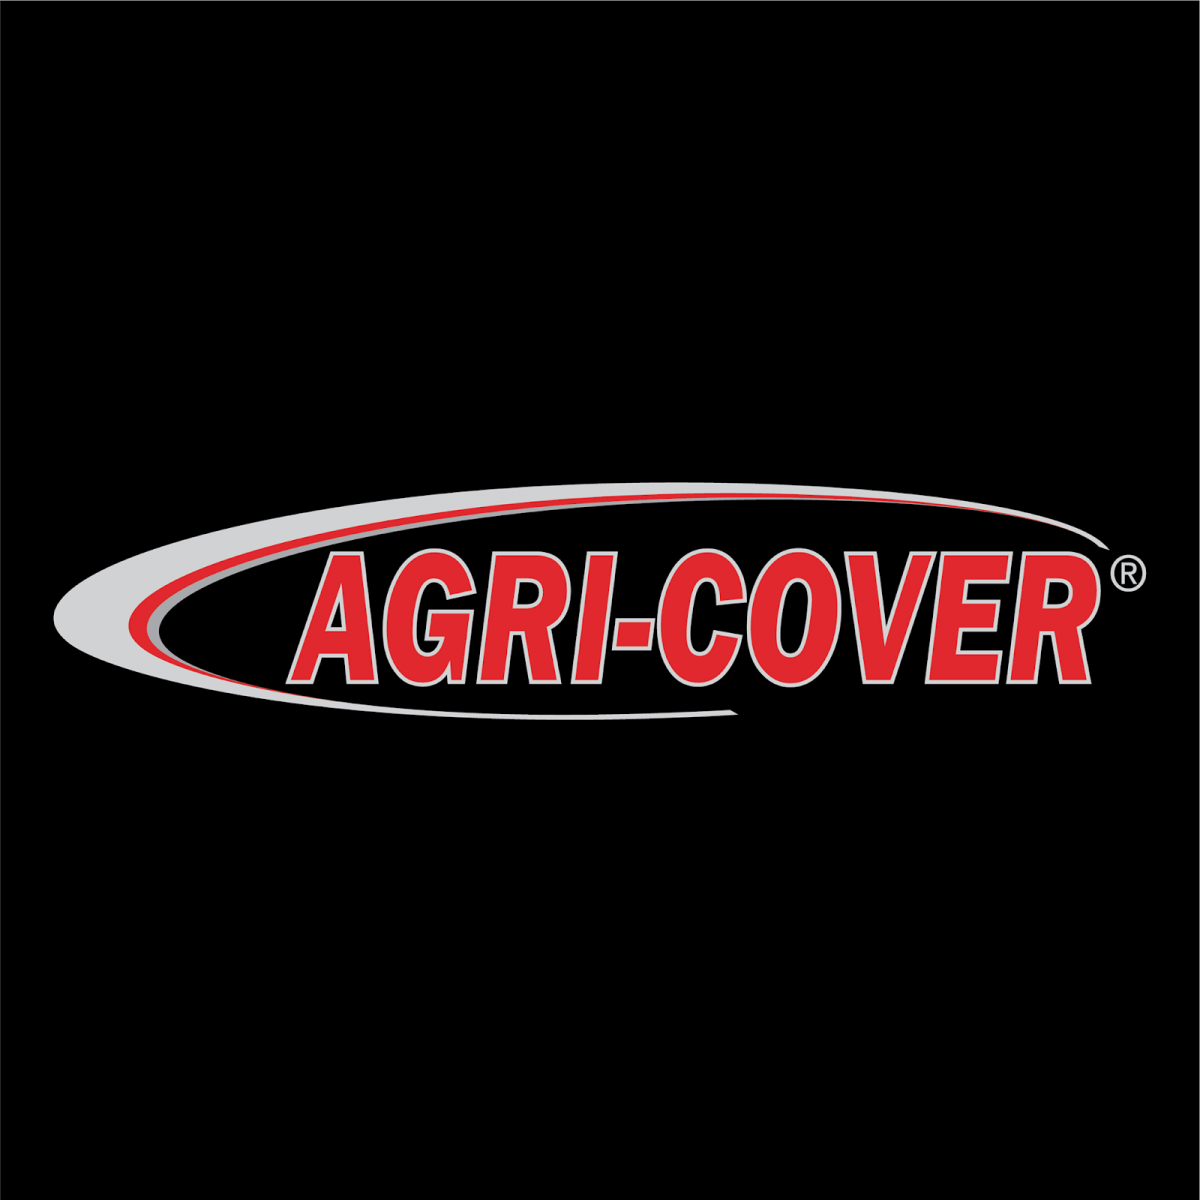 Agri-Cover Receives Growing Jamestown Award: Here’s Why Photo